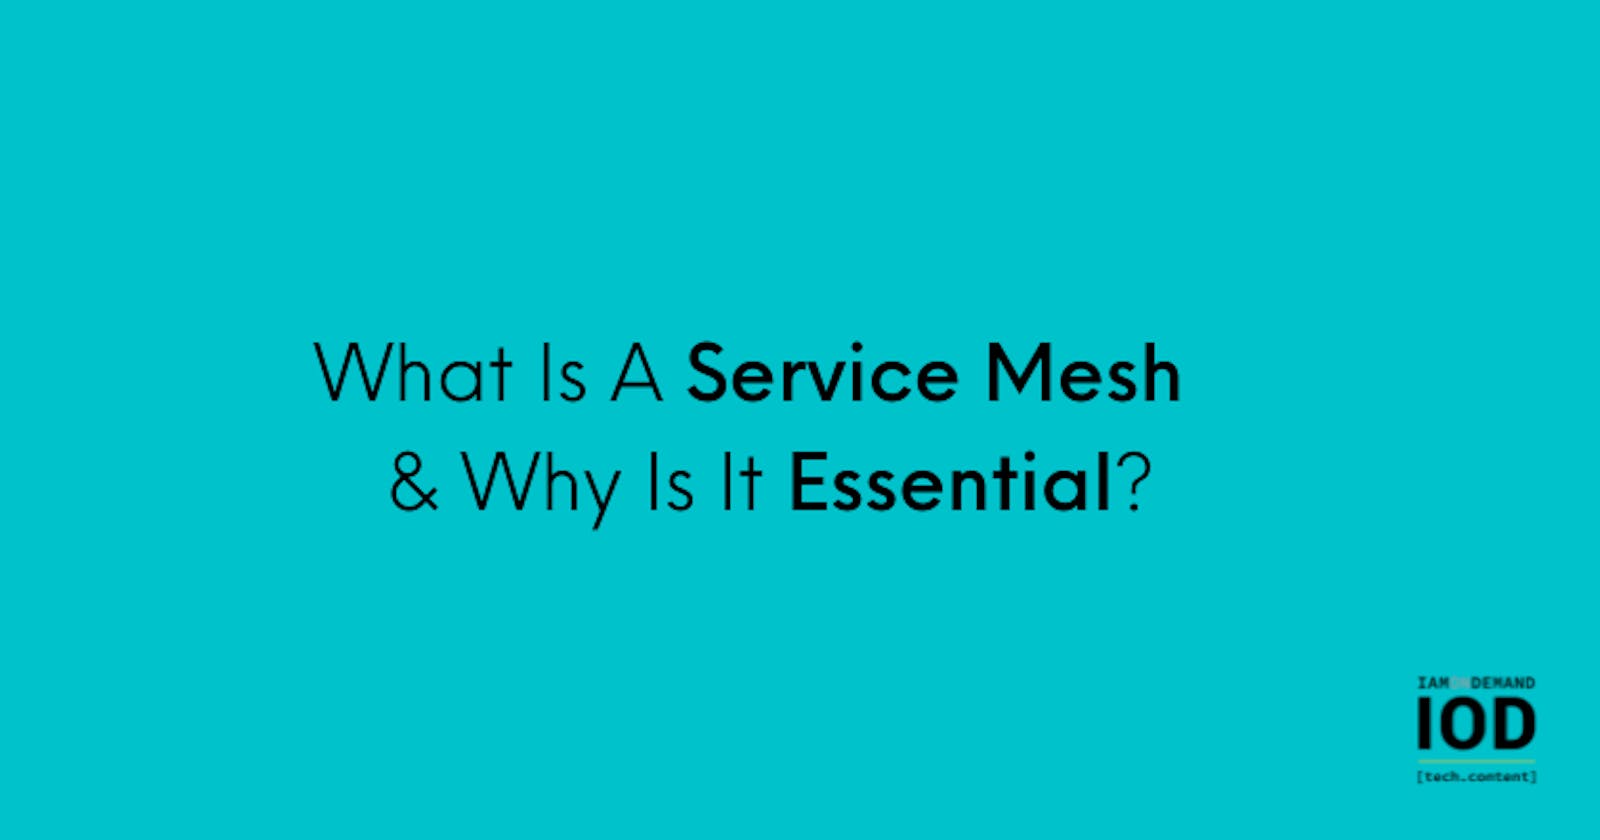 What Is a Service Mesh, and Why Is It Essential for Your Kubernetes Deployments?